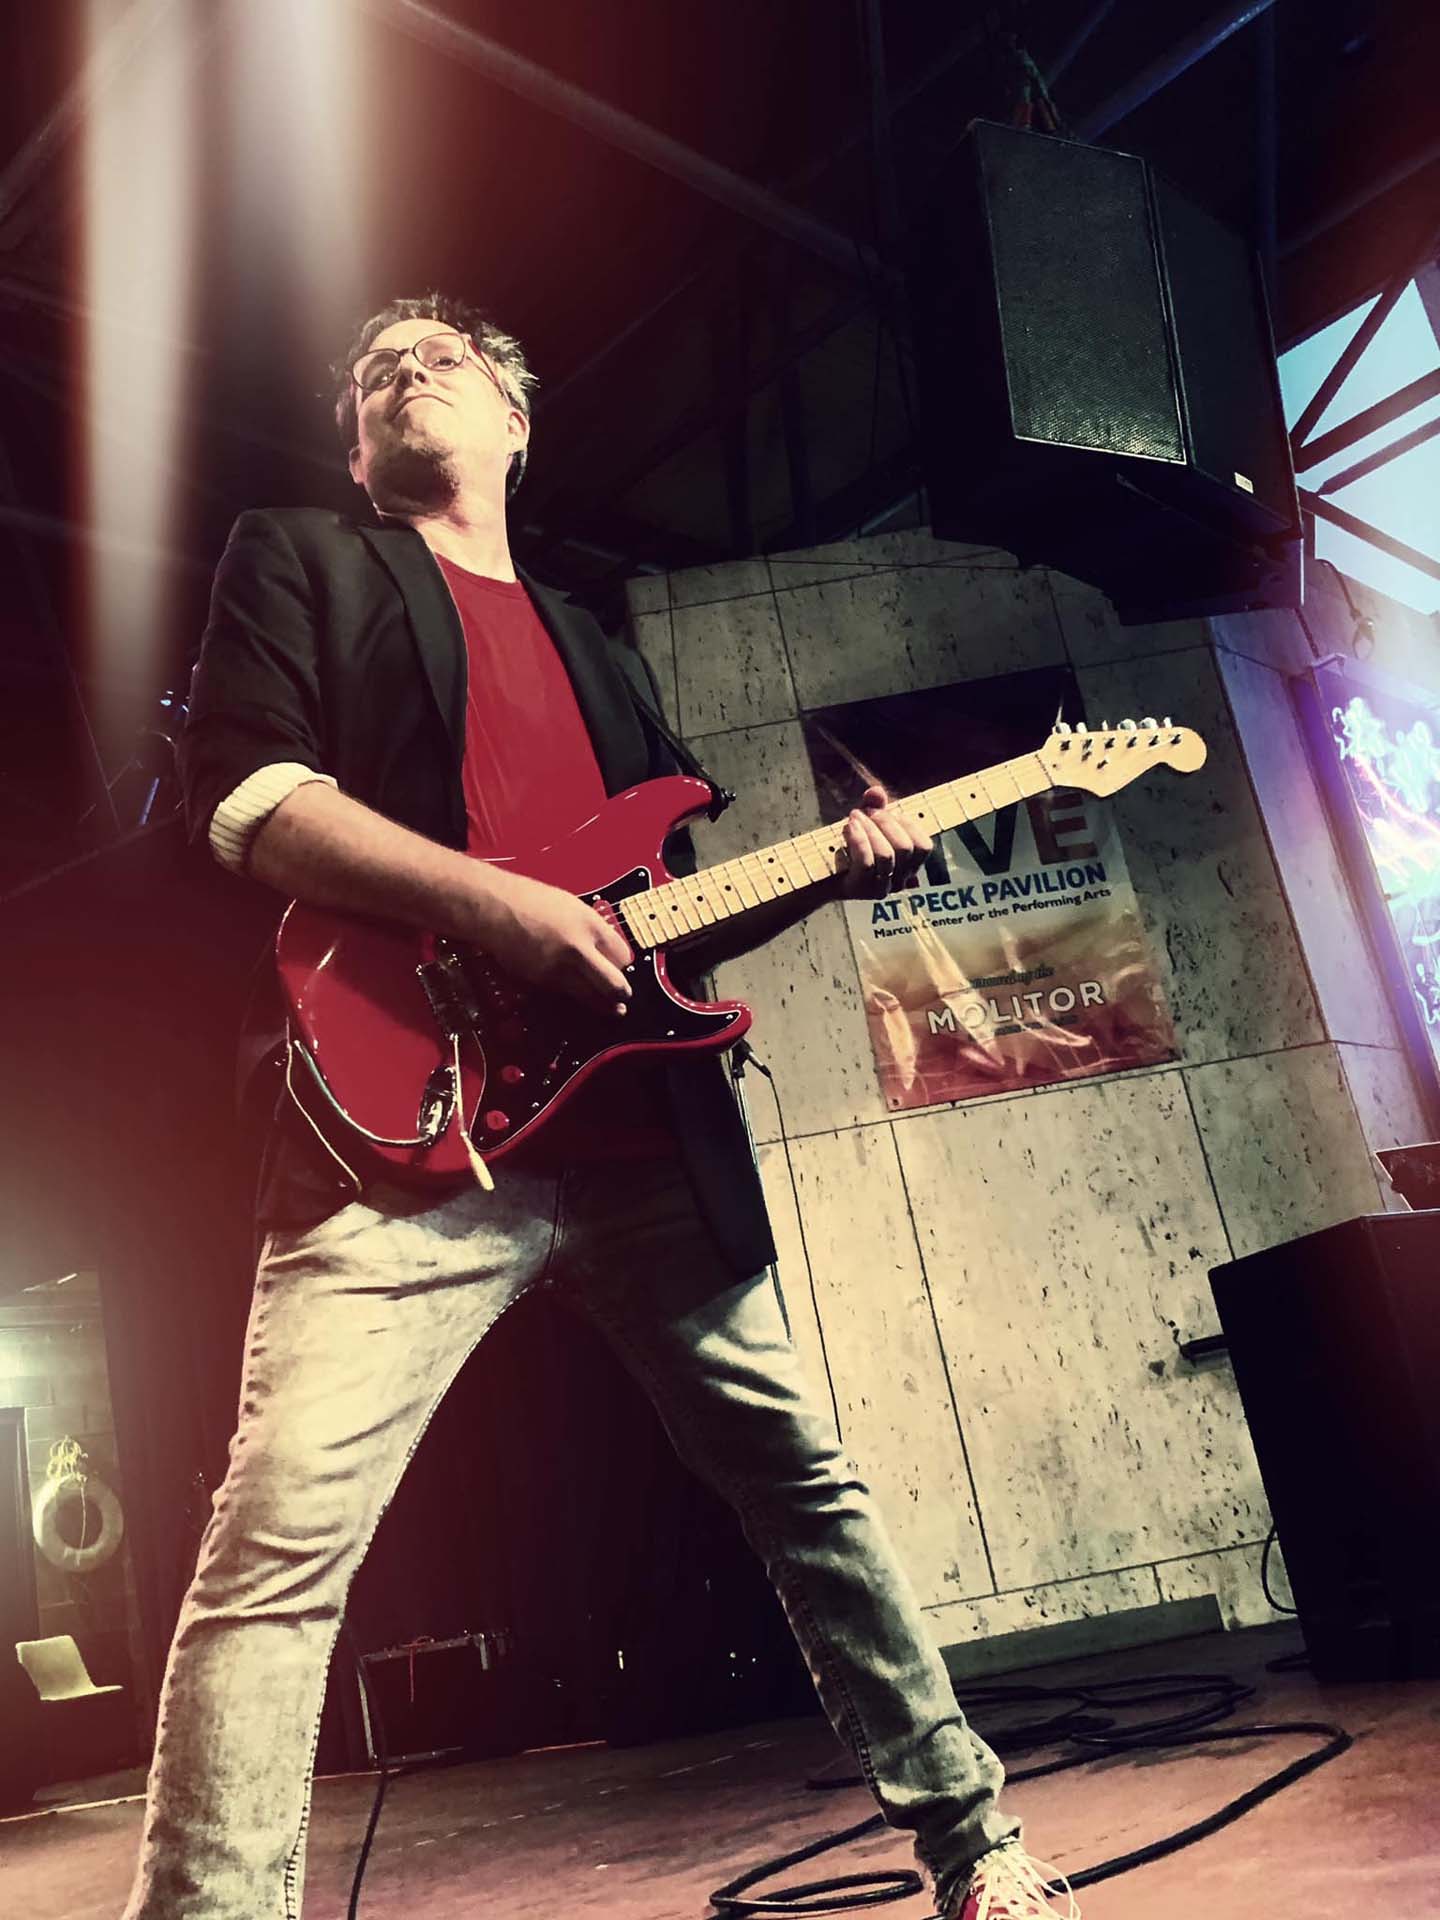 looking up at a guy wearing a red shirt and black suit coat and jeans playing a guitar